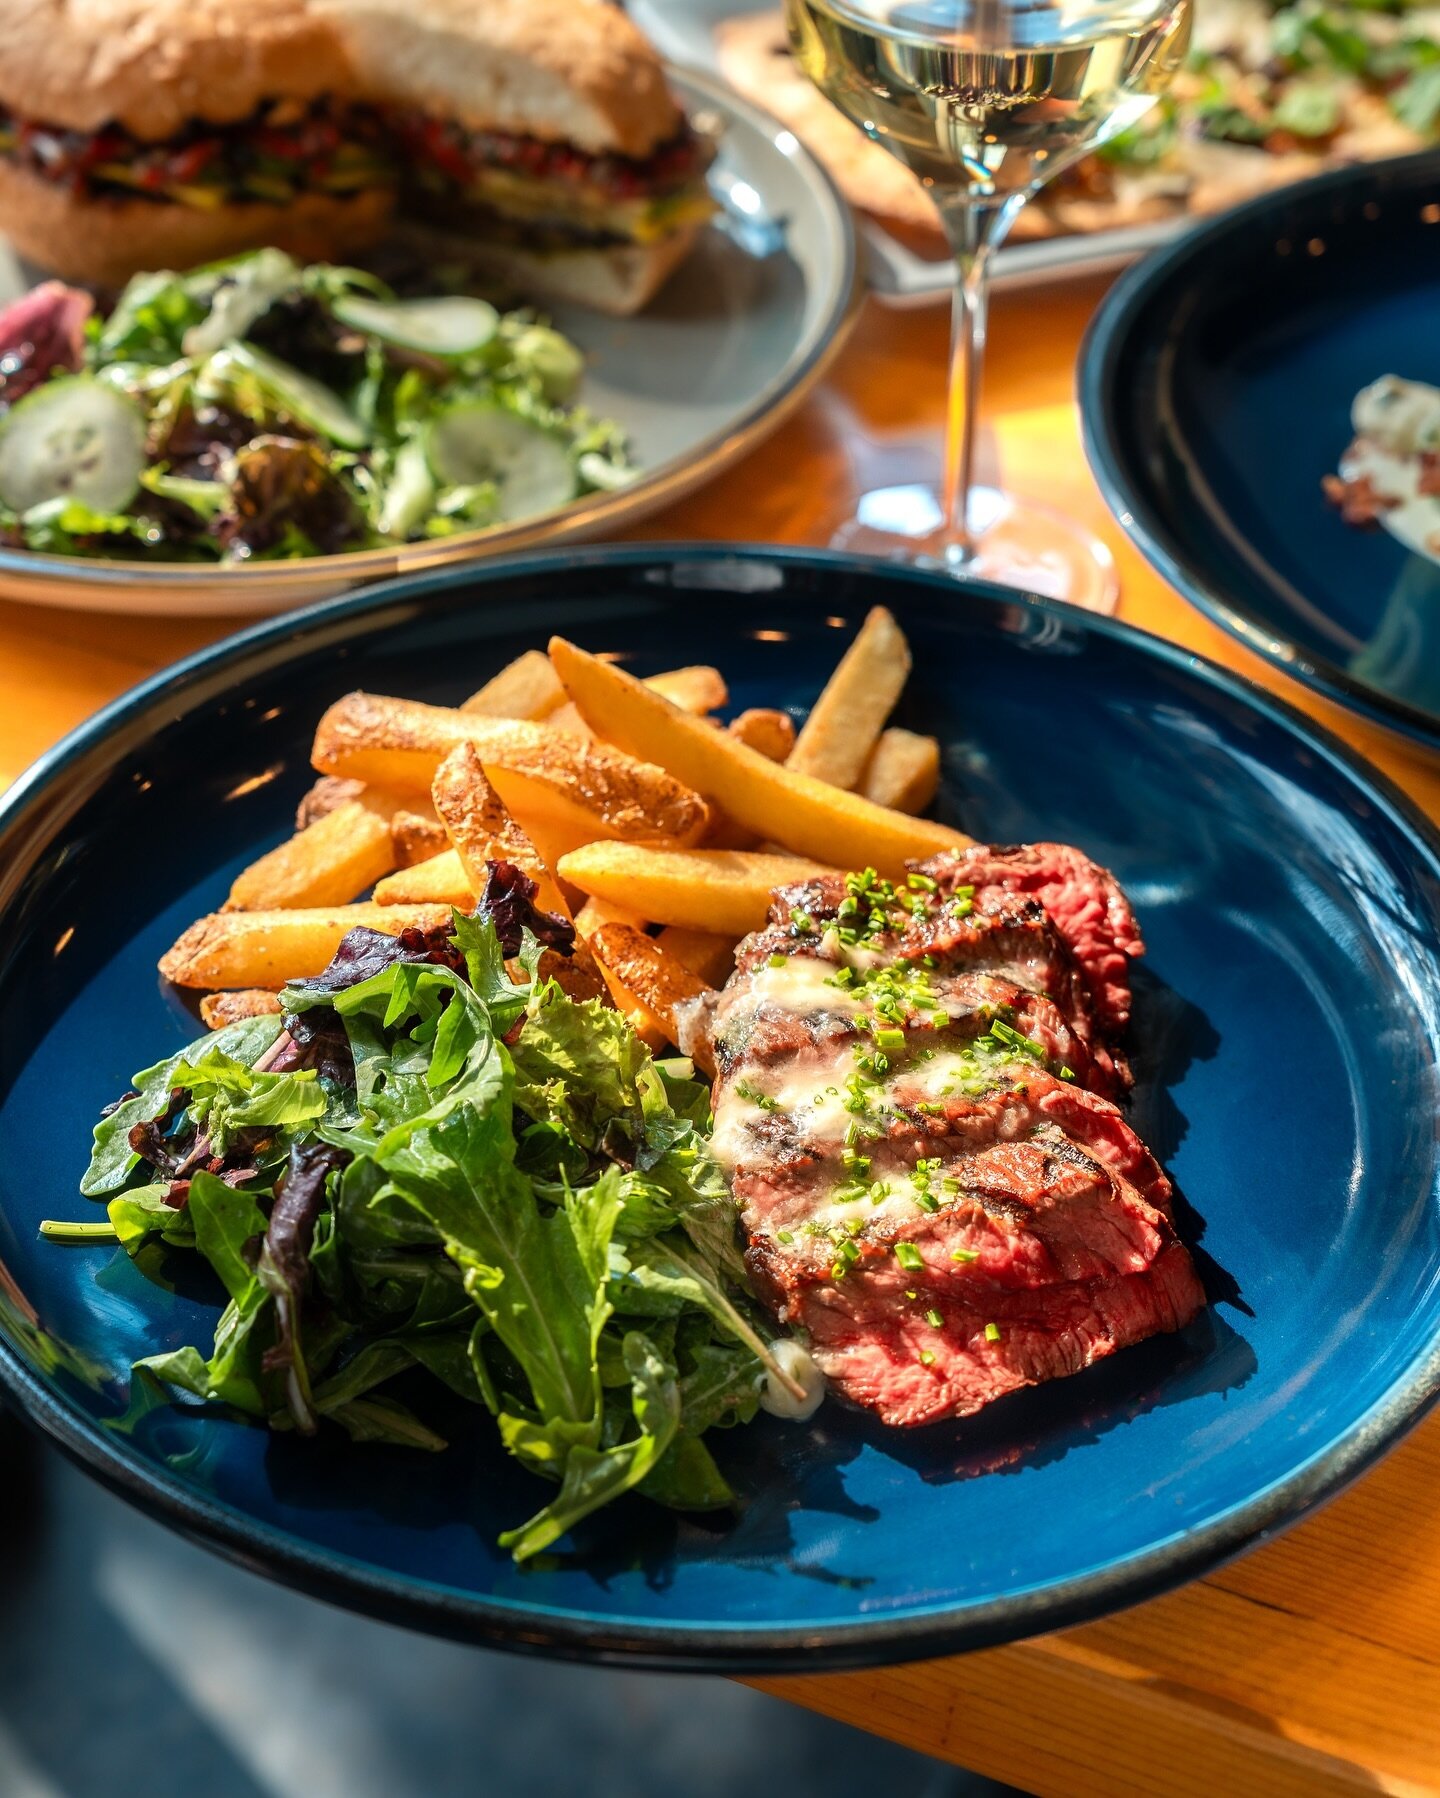 Steak Frites 😍

Topped with our chef&rsquo;s compound butter, with garlic, shallot, lemon, and parsley, and then drizzled with a fresh chimichurri, this plate is an easy choice!

Don&rsquo;t forget, we&rsquo;re open until 11pm tonight and 3pm-10pm S